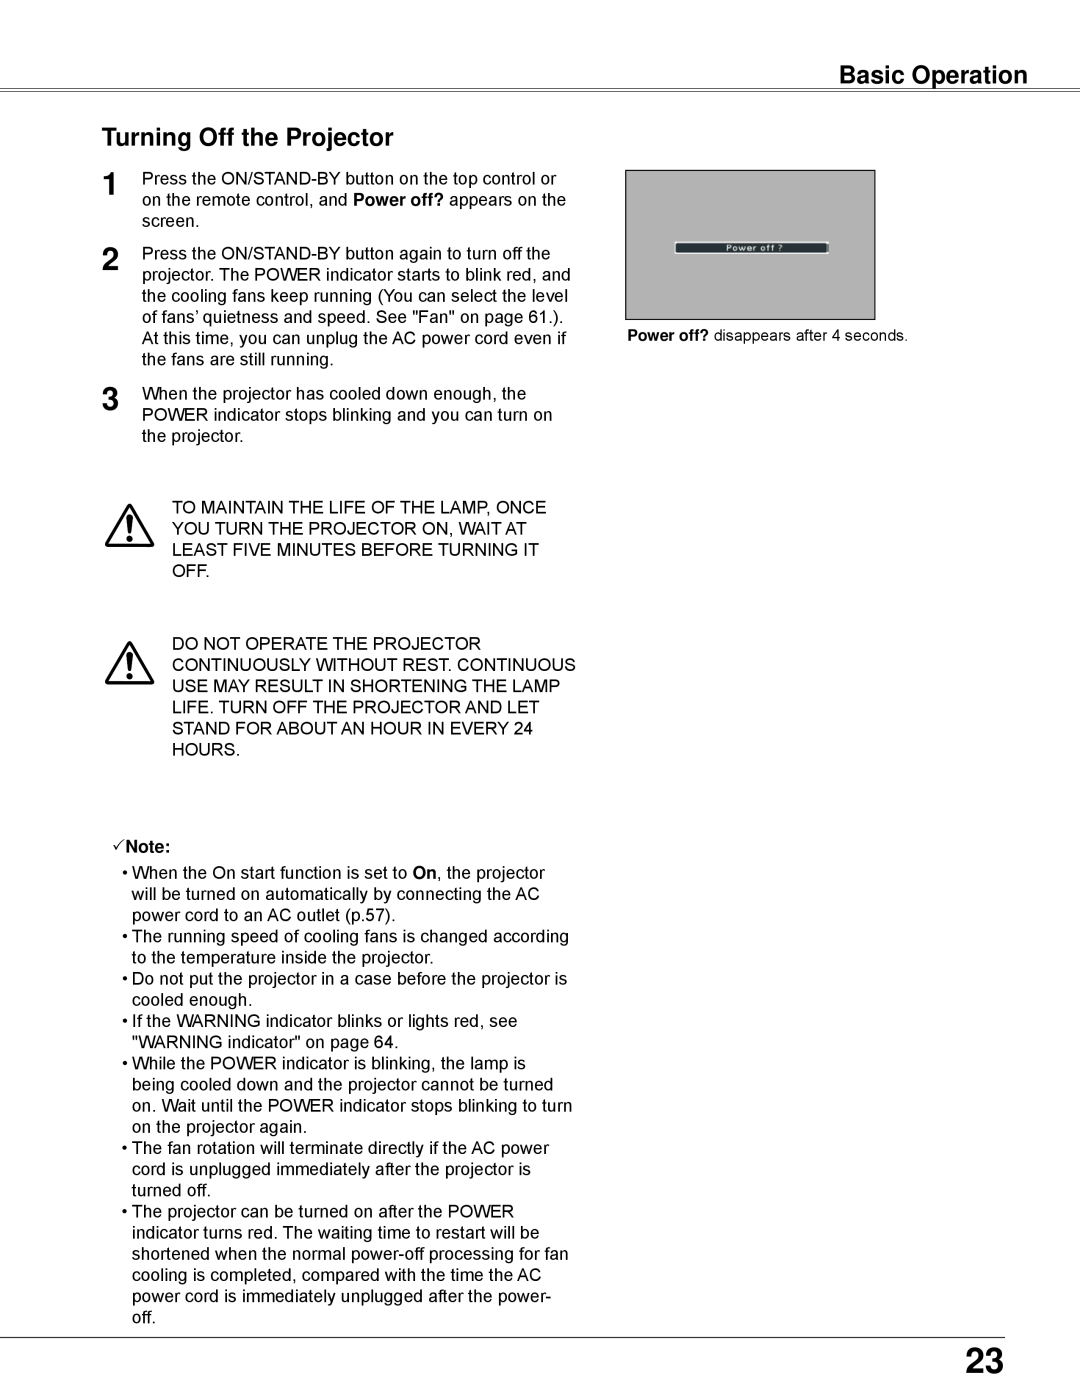 Sanyo PLC-WXU700 owner manual Basic Operation Turning Off the Projector, Note, Power off? disappears after 4 seconds 